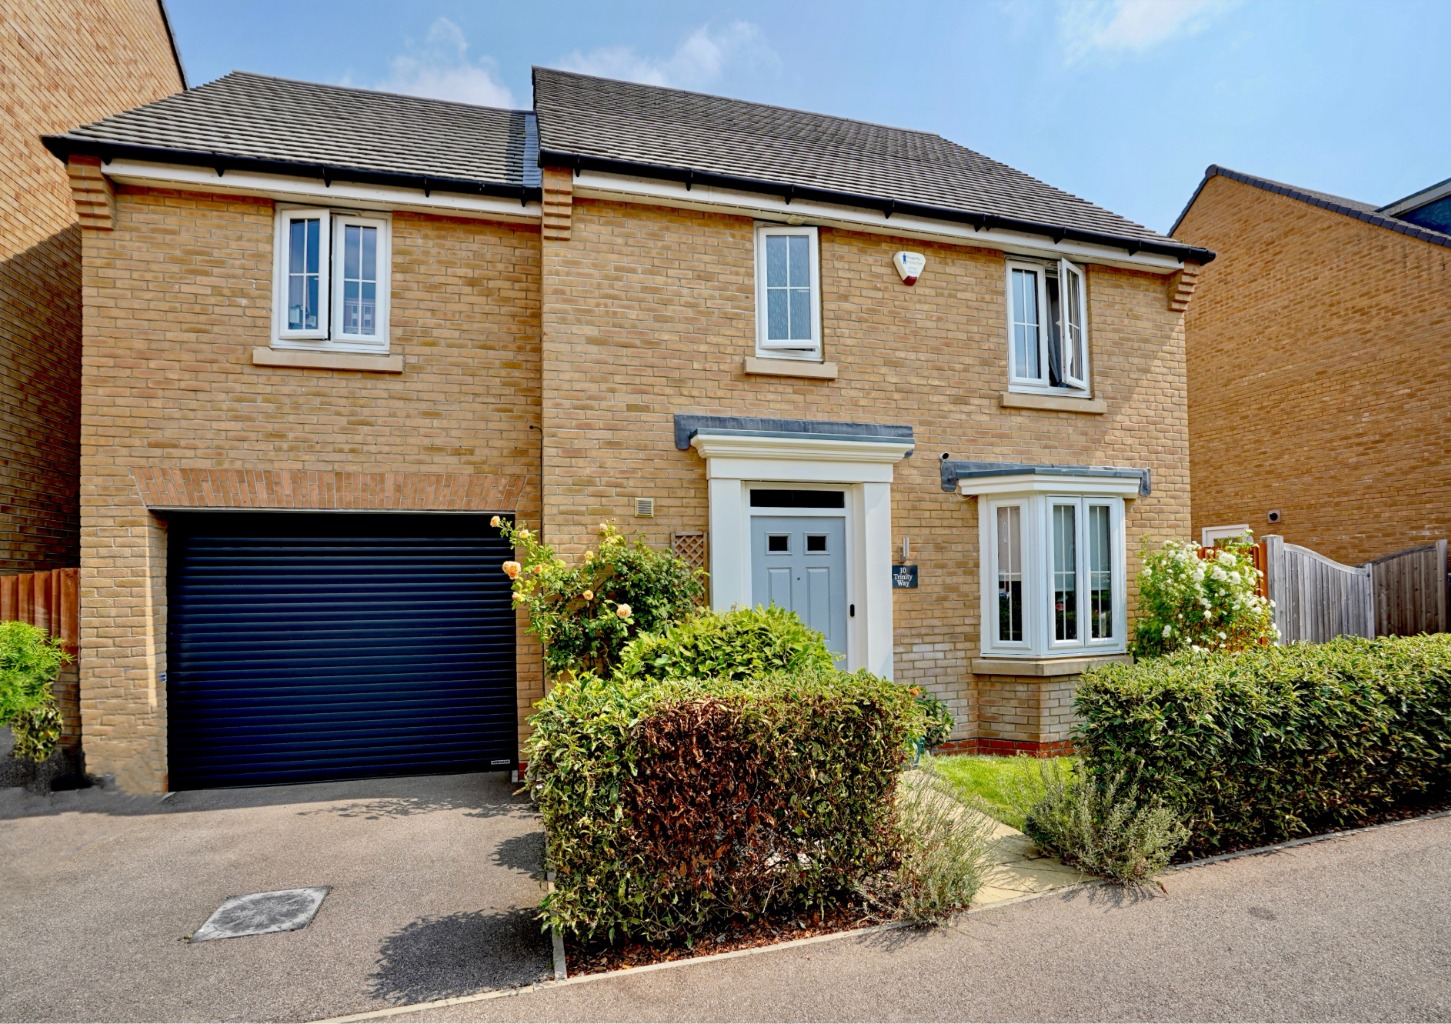 4 bed detached house for sale in Trinity Way, Cambridge - Property Image 1